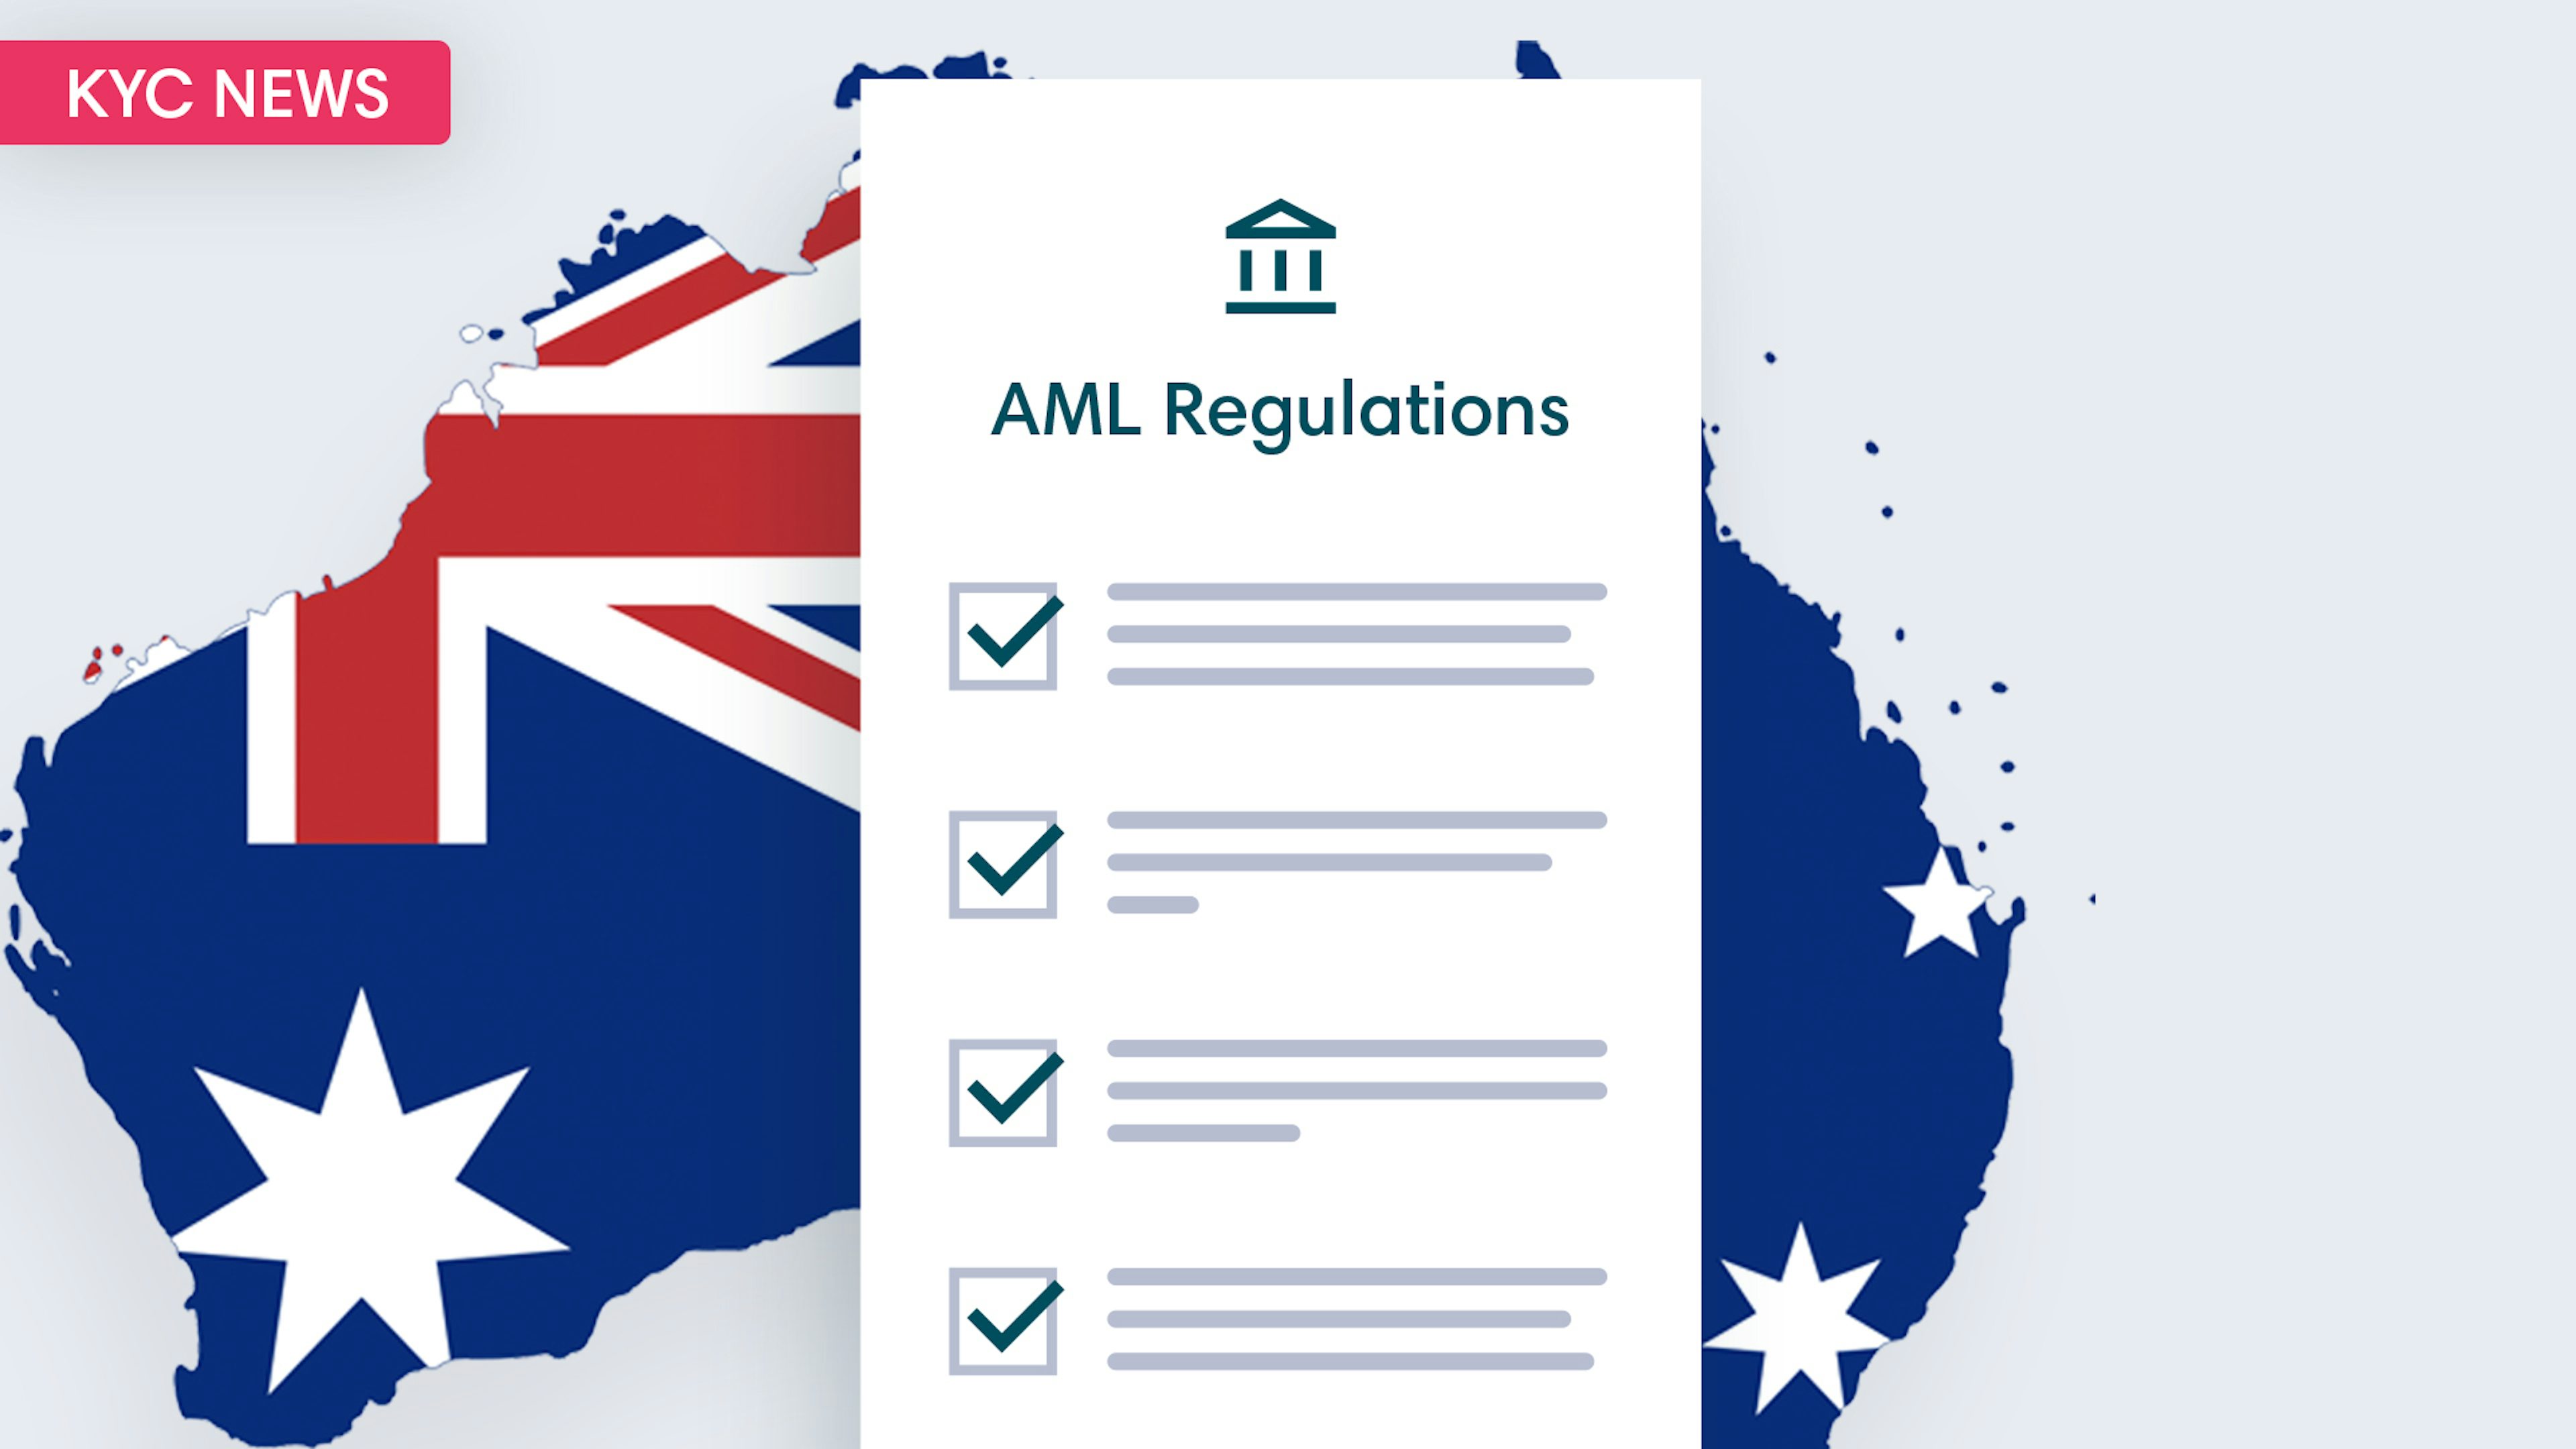 Australian financial institutions concerned about AML loopholes